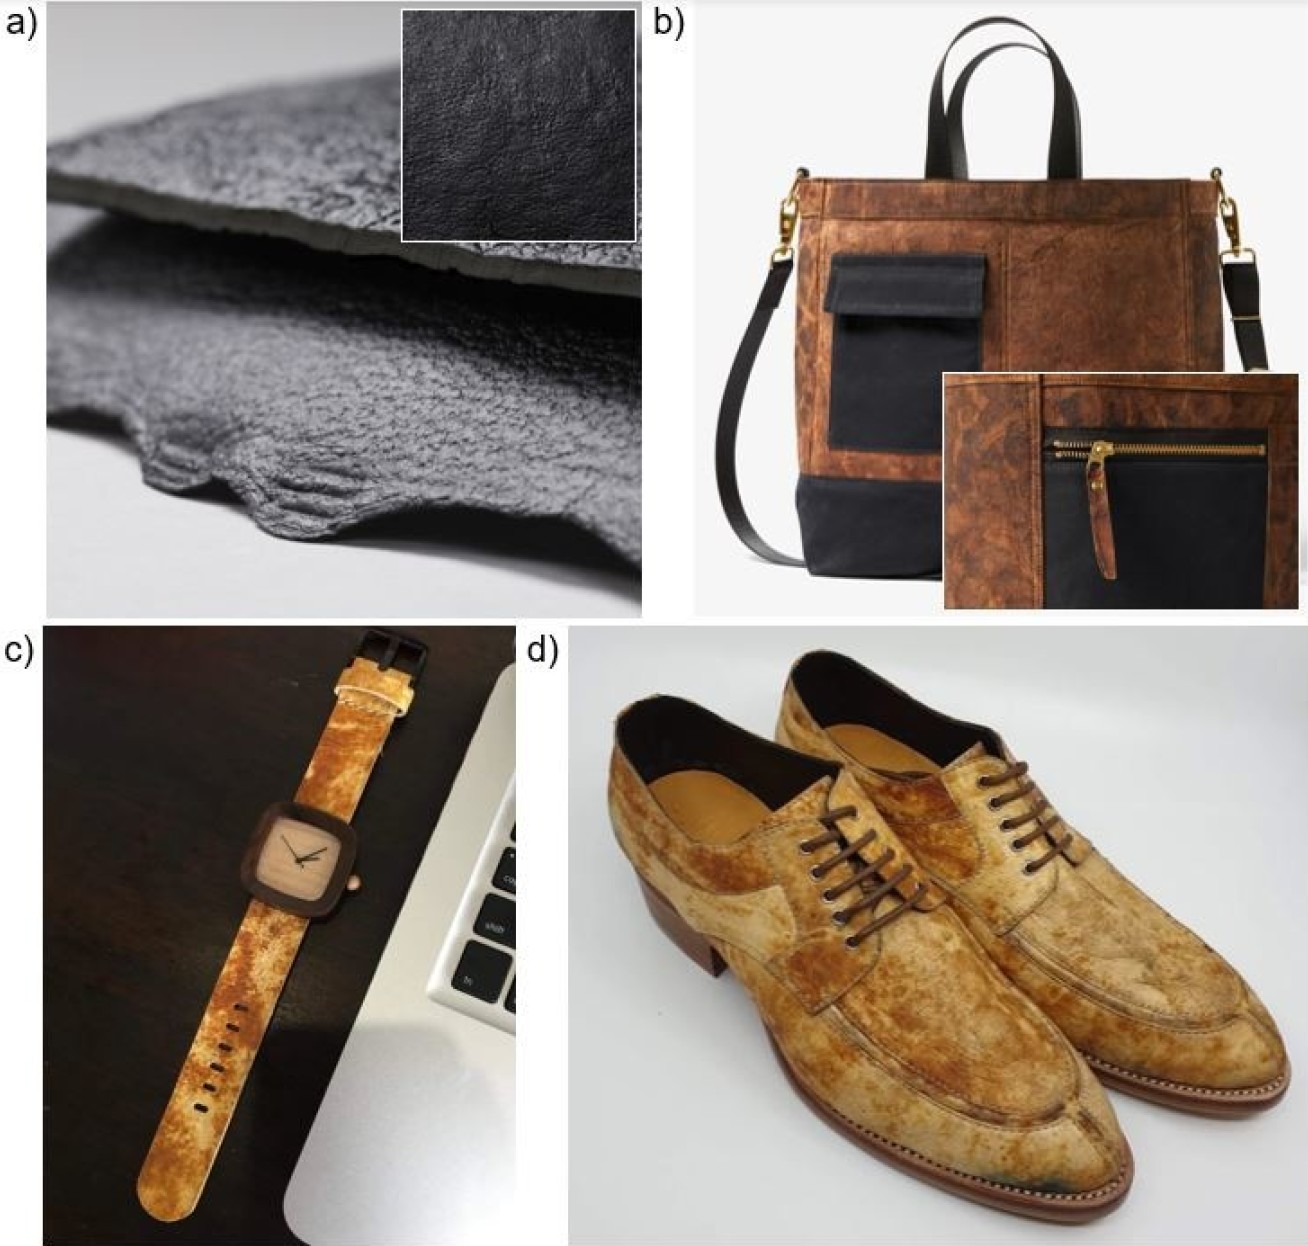 Photos of fungal leather used in a bag, a watch, and shoes